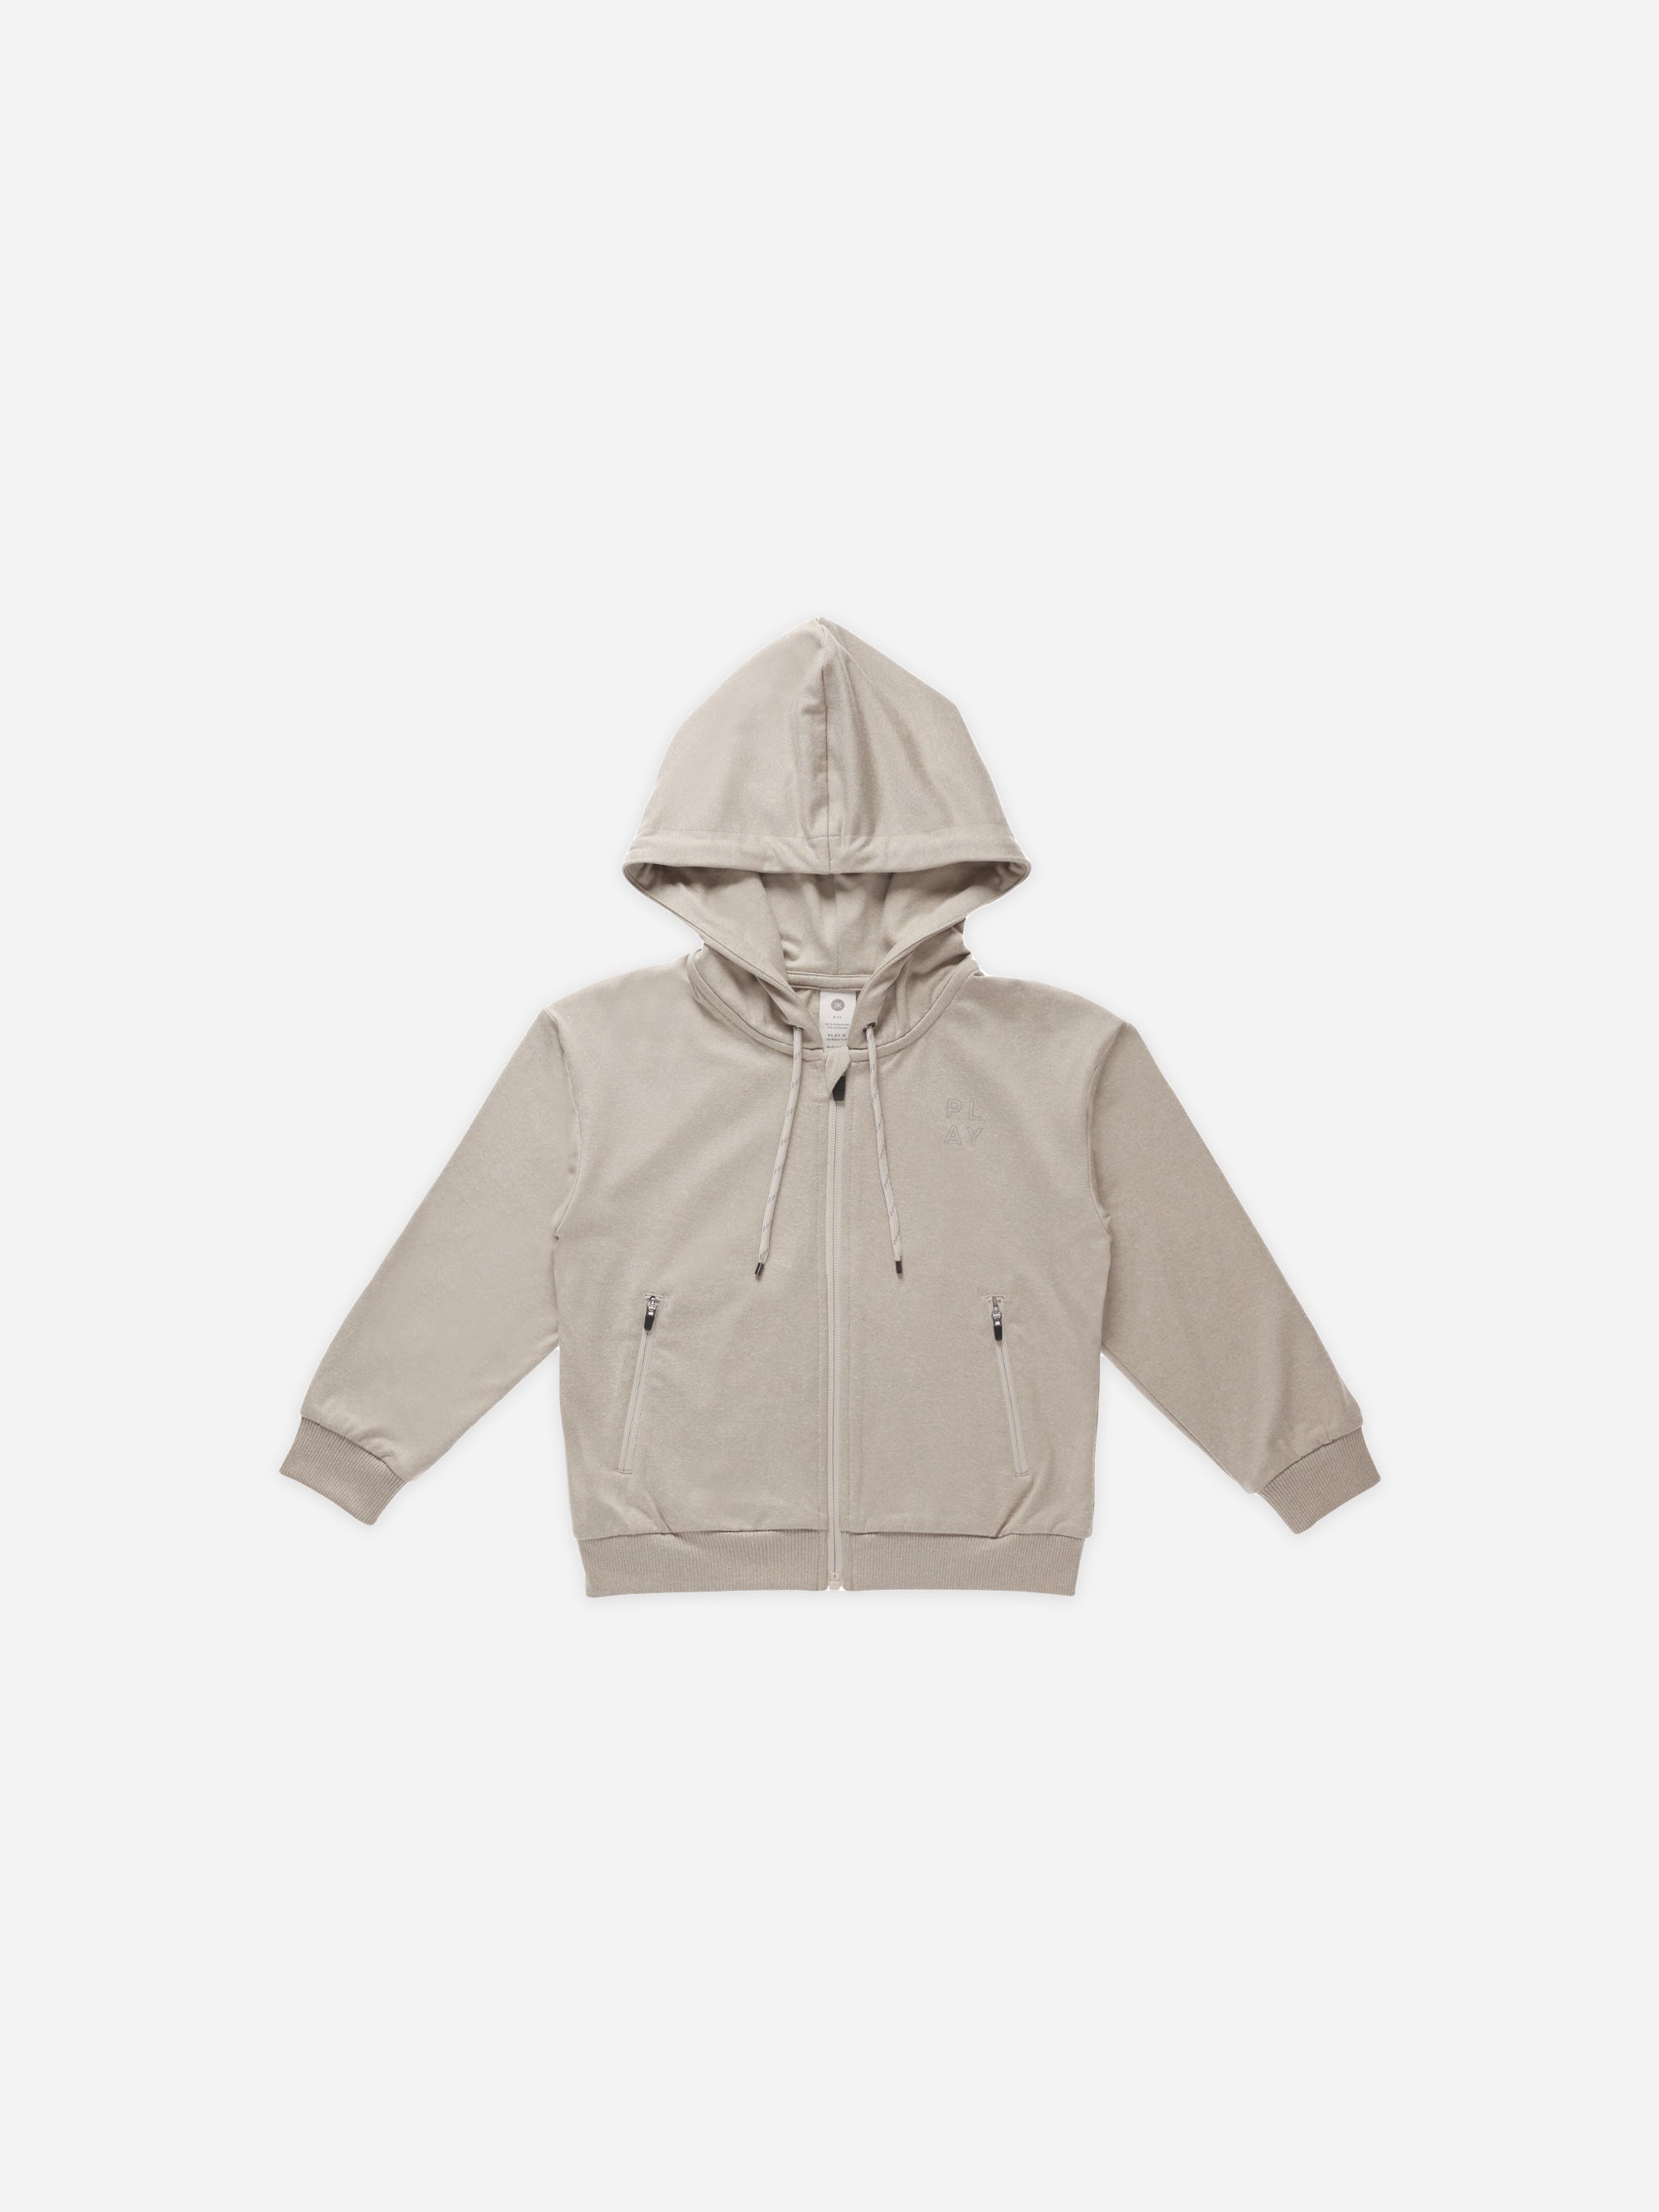 Zip-Up Tech Hoodie || Heathered Dove - Rylee + Cru | Kids Clothes | Trendy Baby Clothes | Modern Infant Outfits |